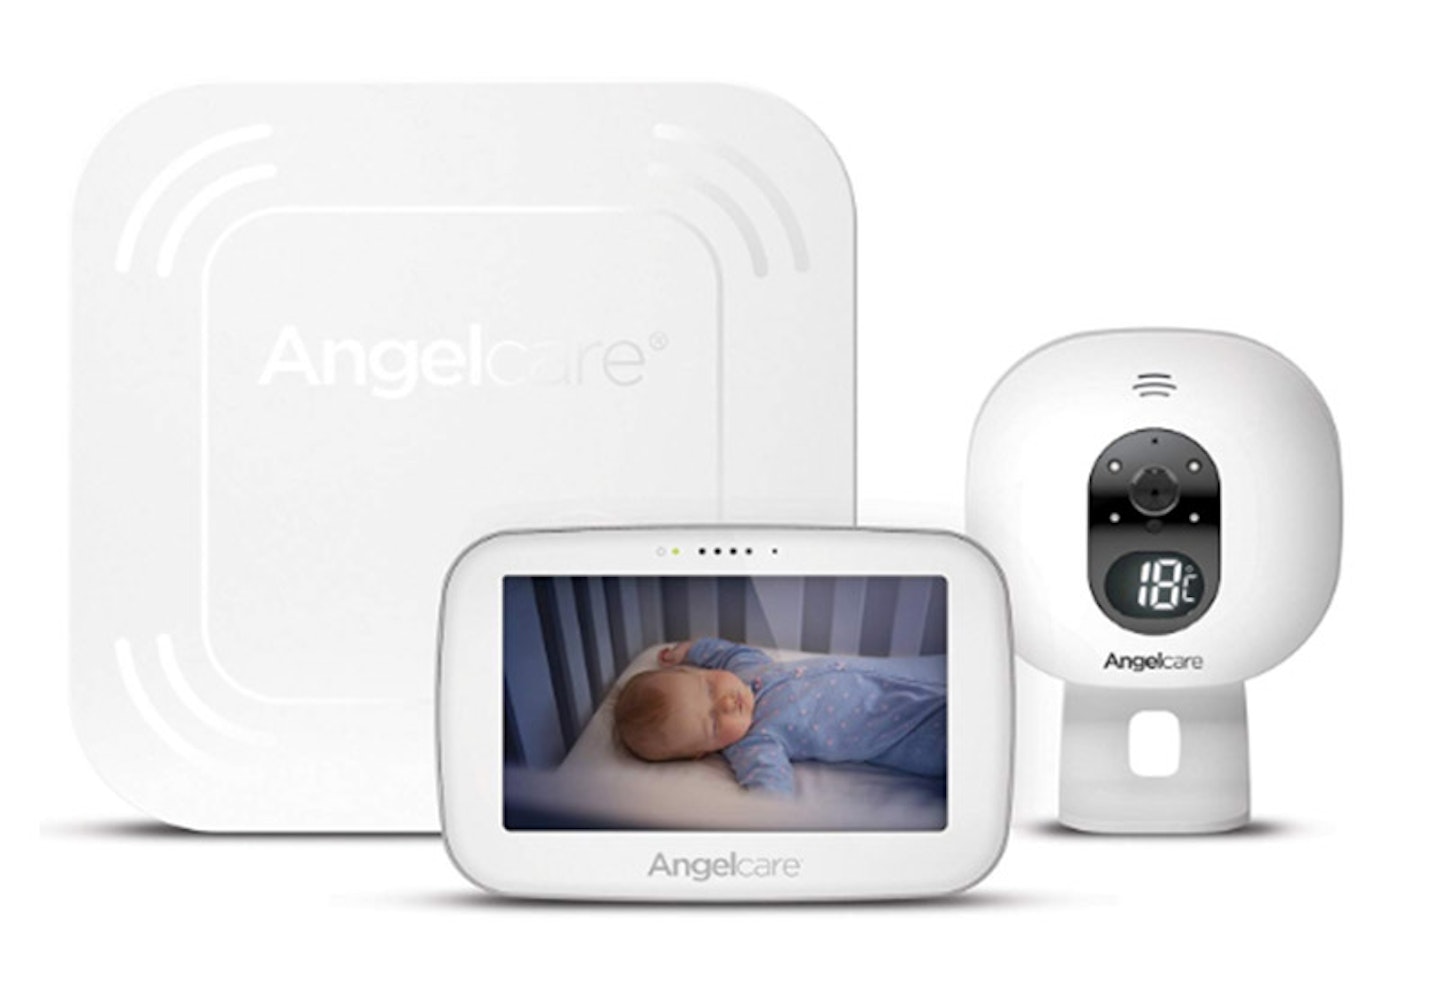 Best baby breathing monitor Angelcare AC527 3-in-1 SensAsure Baby Movement Monitor with Video